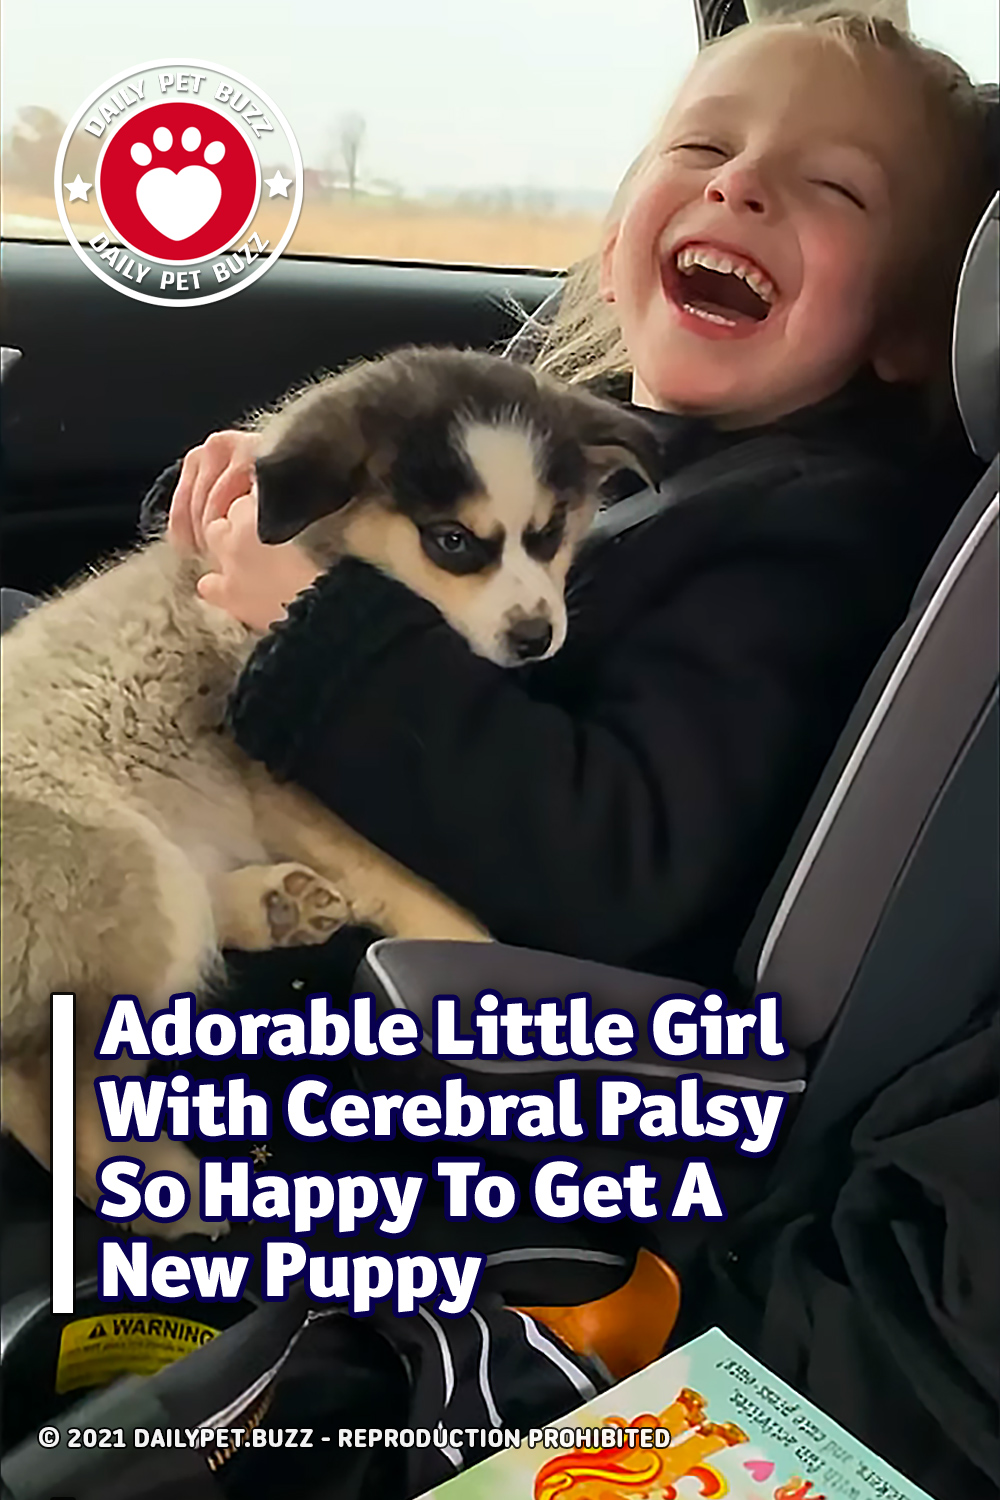 Adorable Little Girl With Cerebral Palsy So Happy To Get A New Puppy